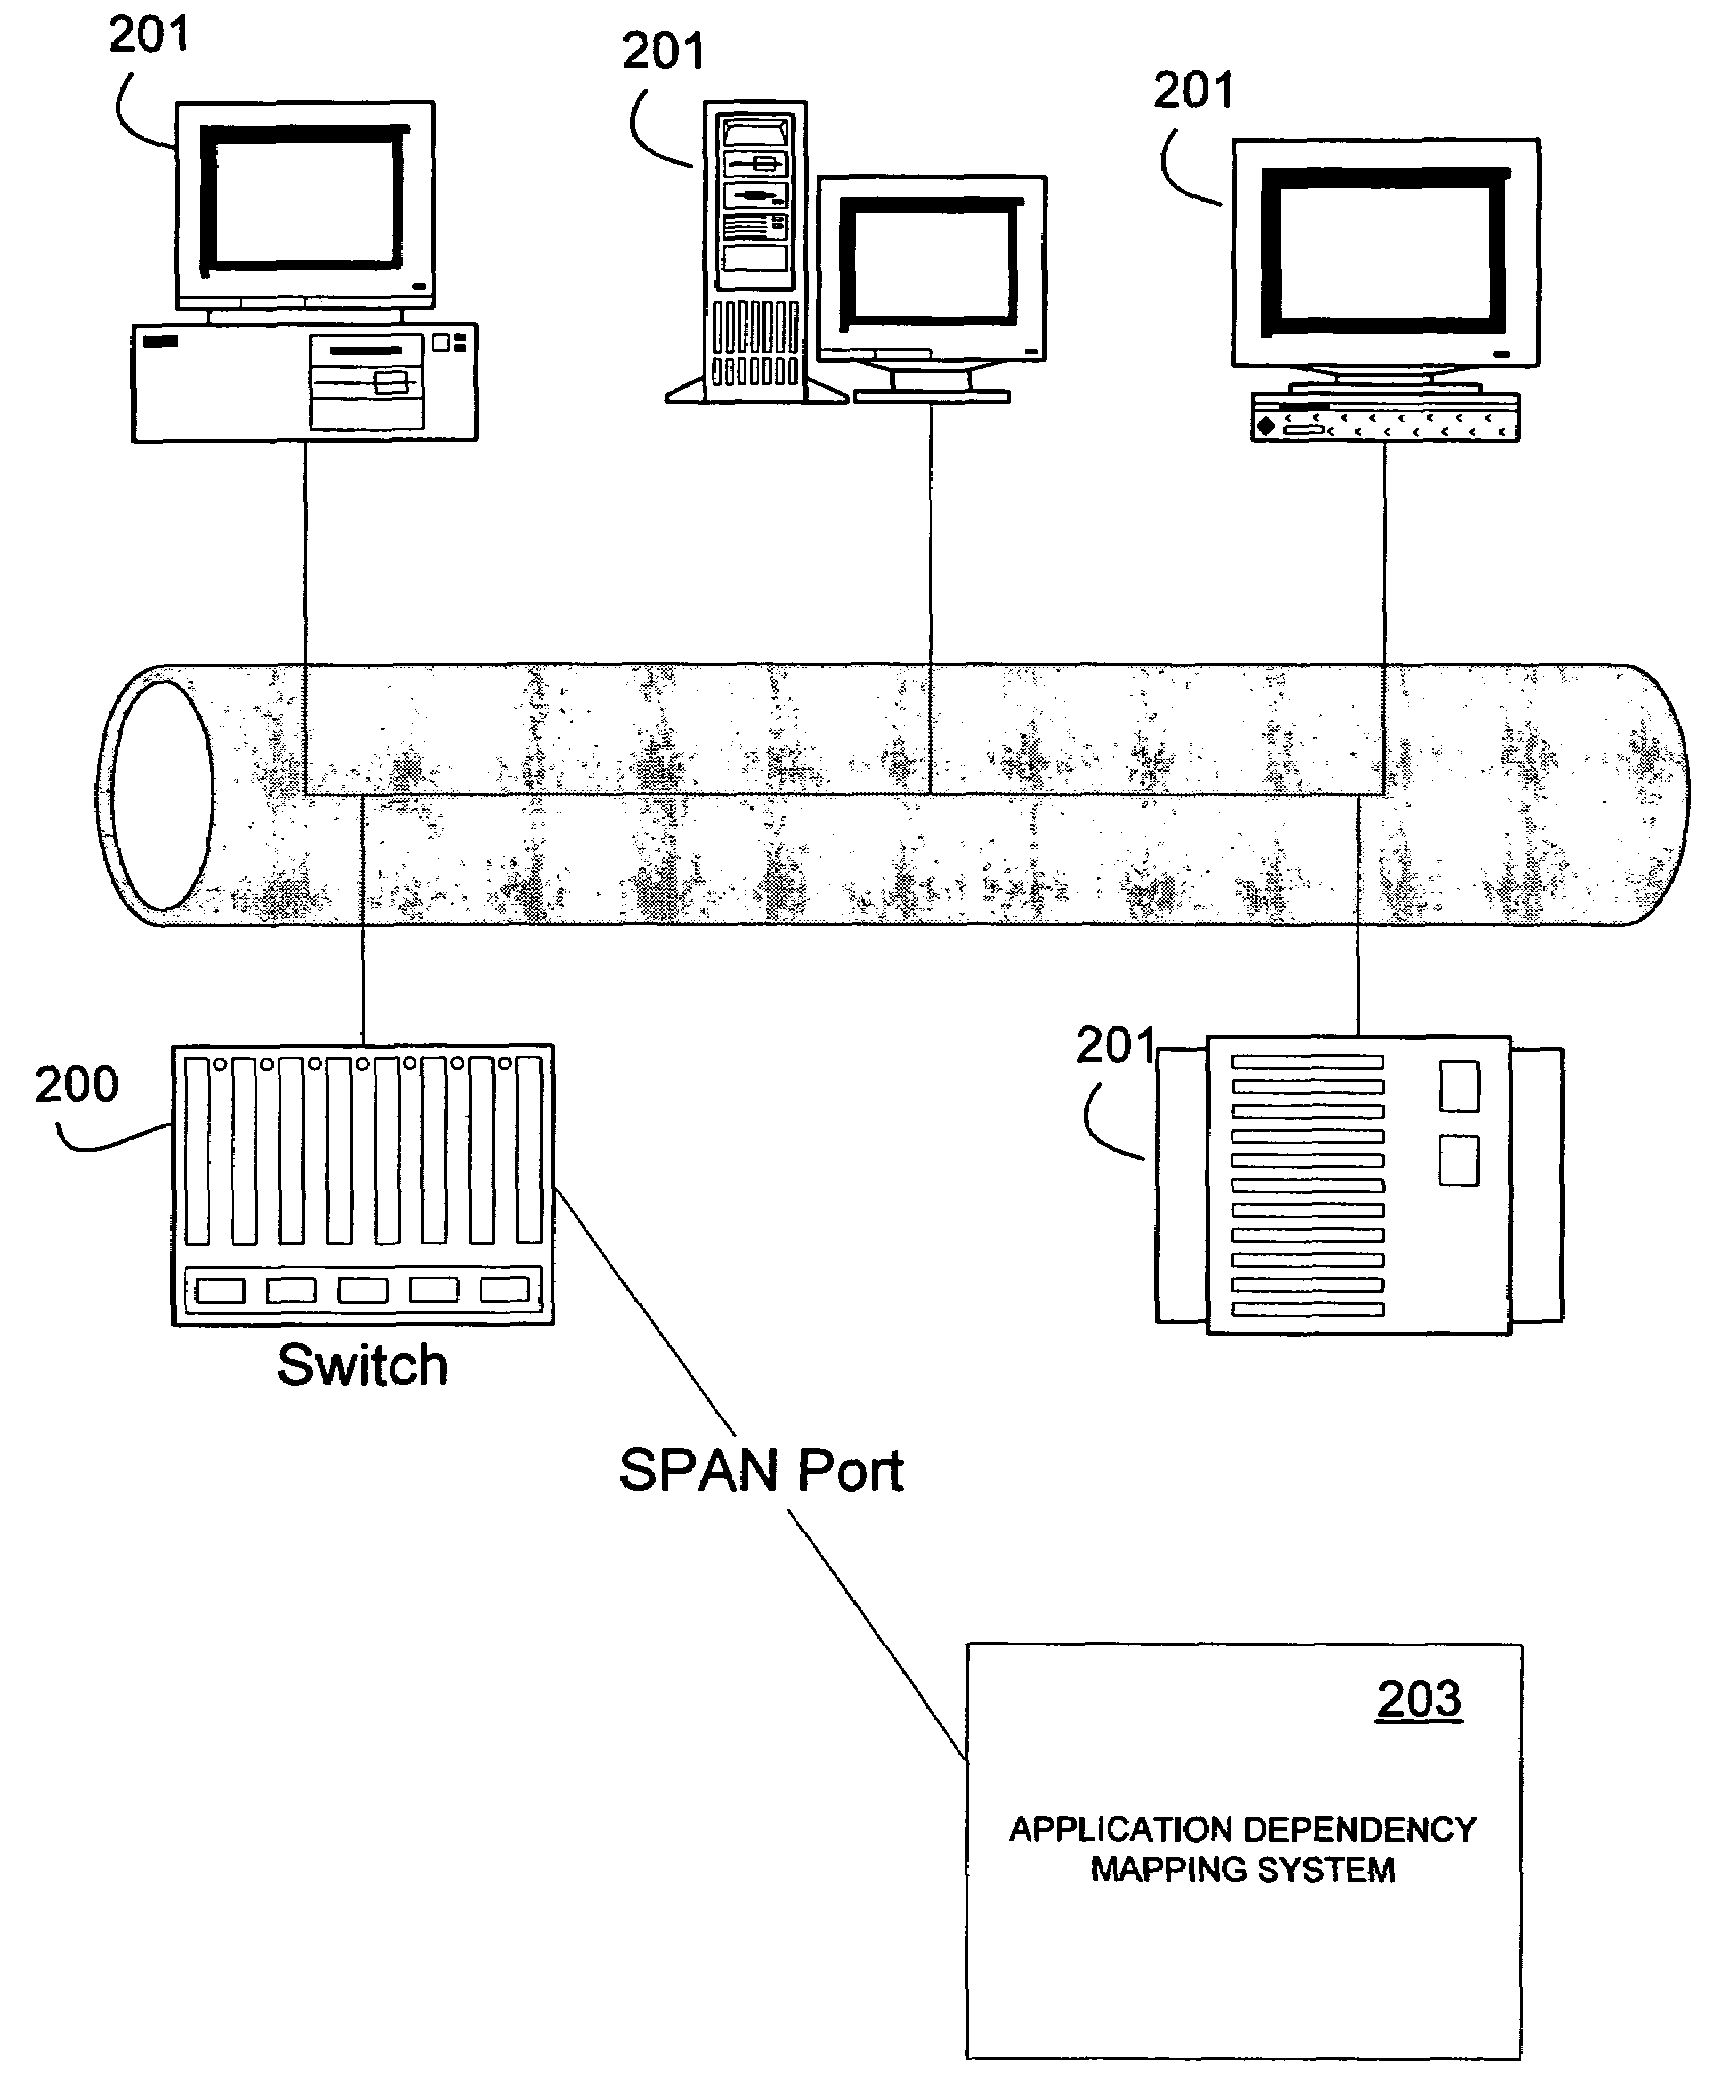 Method and system for automatic classification of applications and services by packet inspection